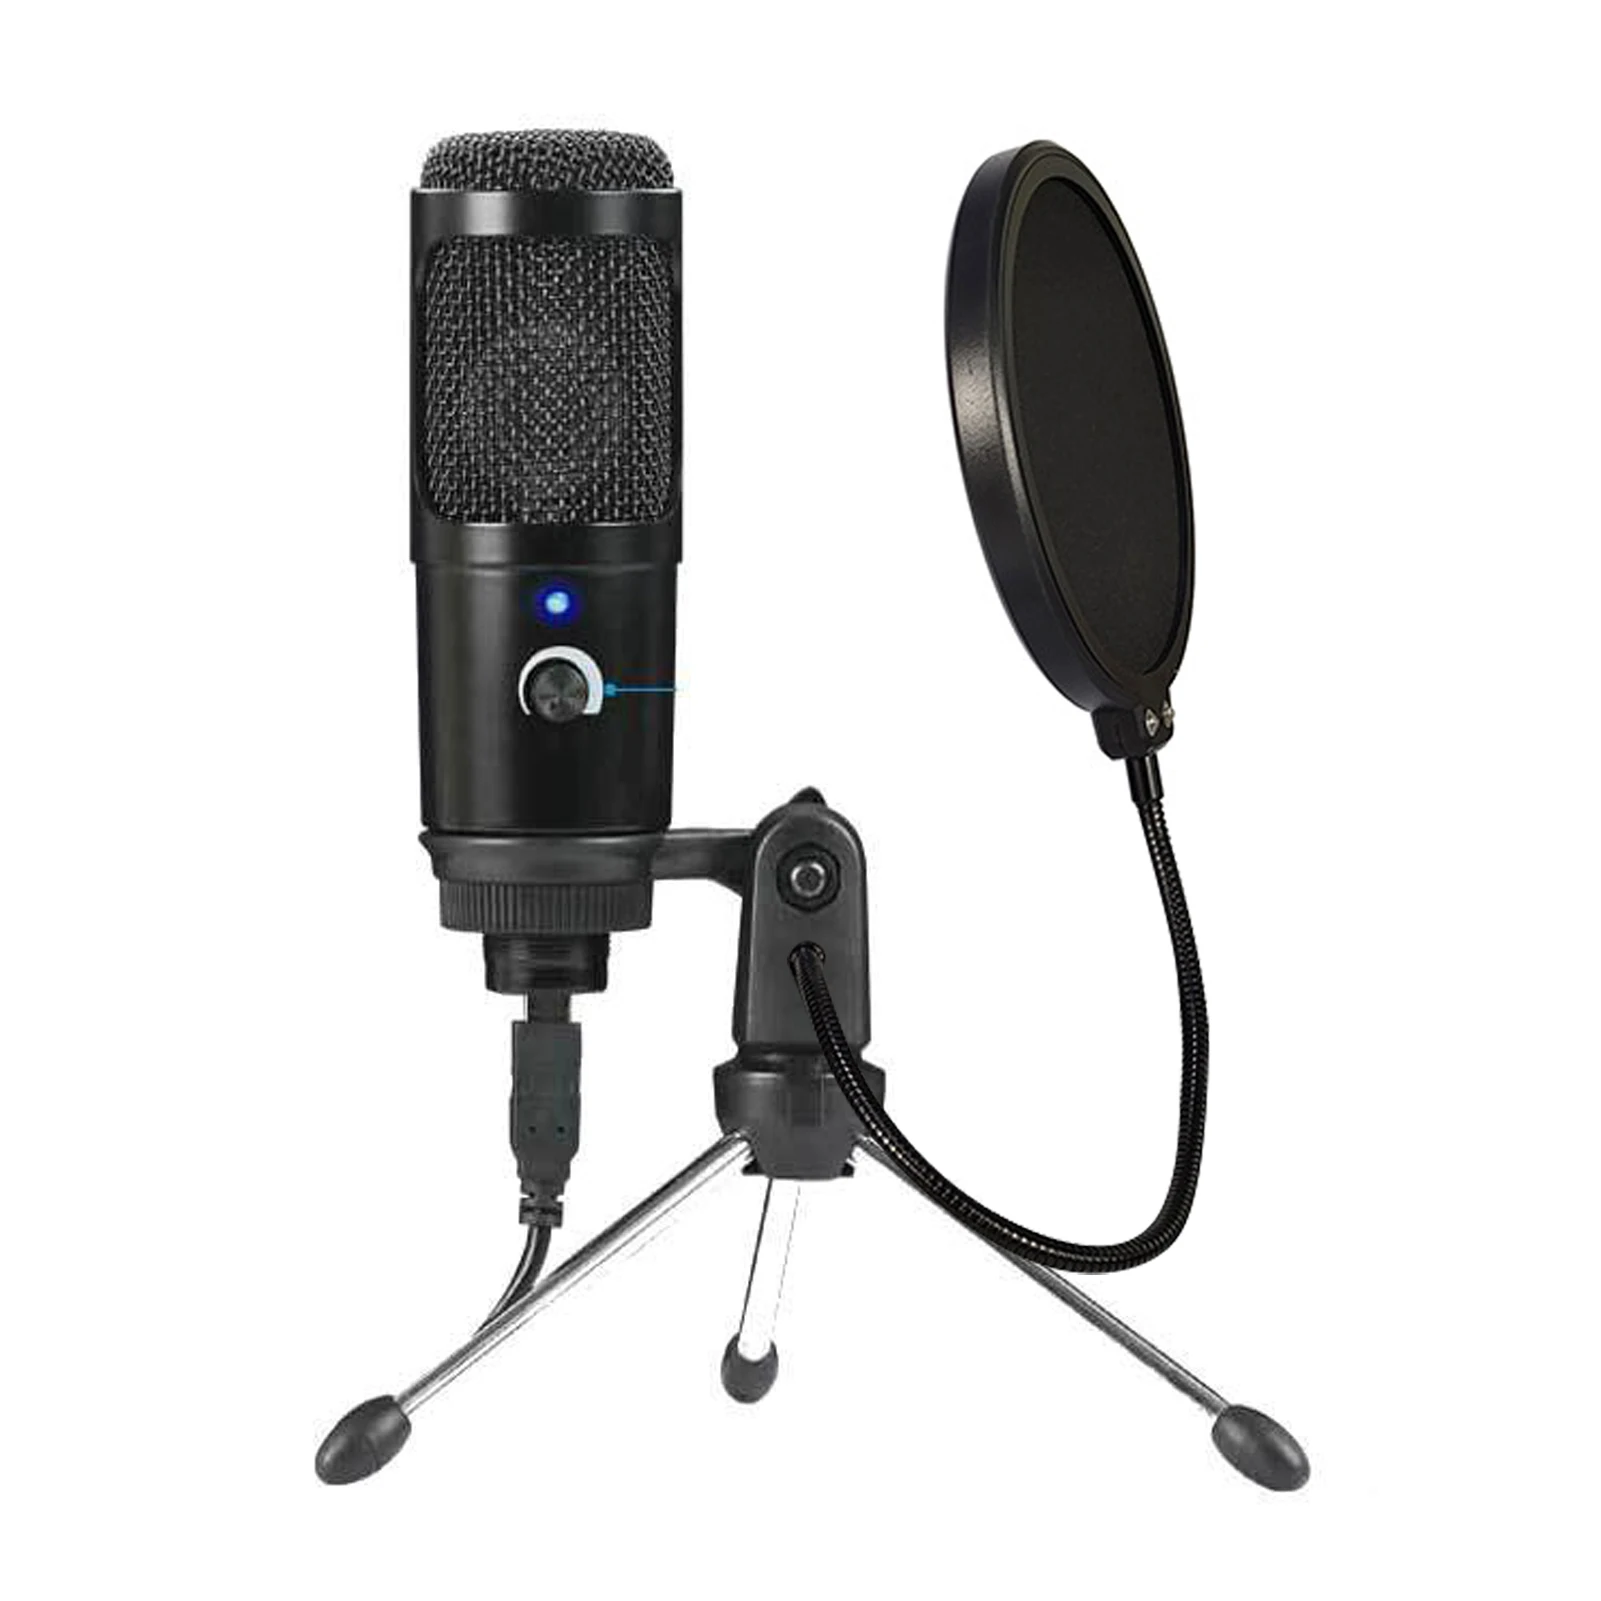 

USB Microphone Desktop Recording Computer Mic Adjustable Angle For Gaming Clear Sound Live Broadcast Business Conference Singing